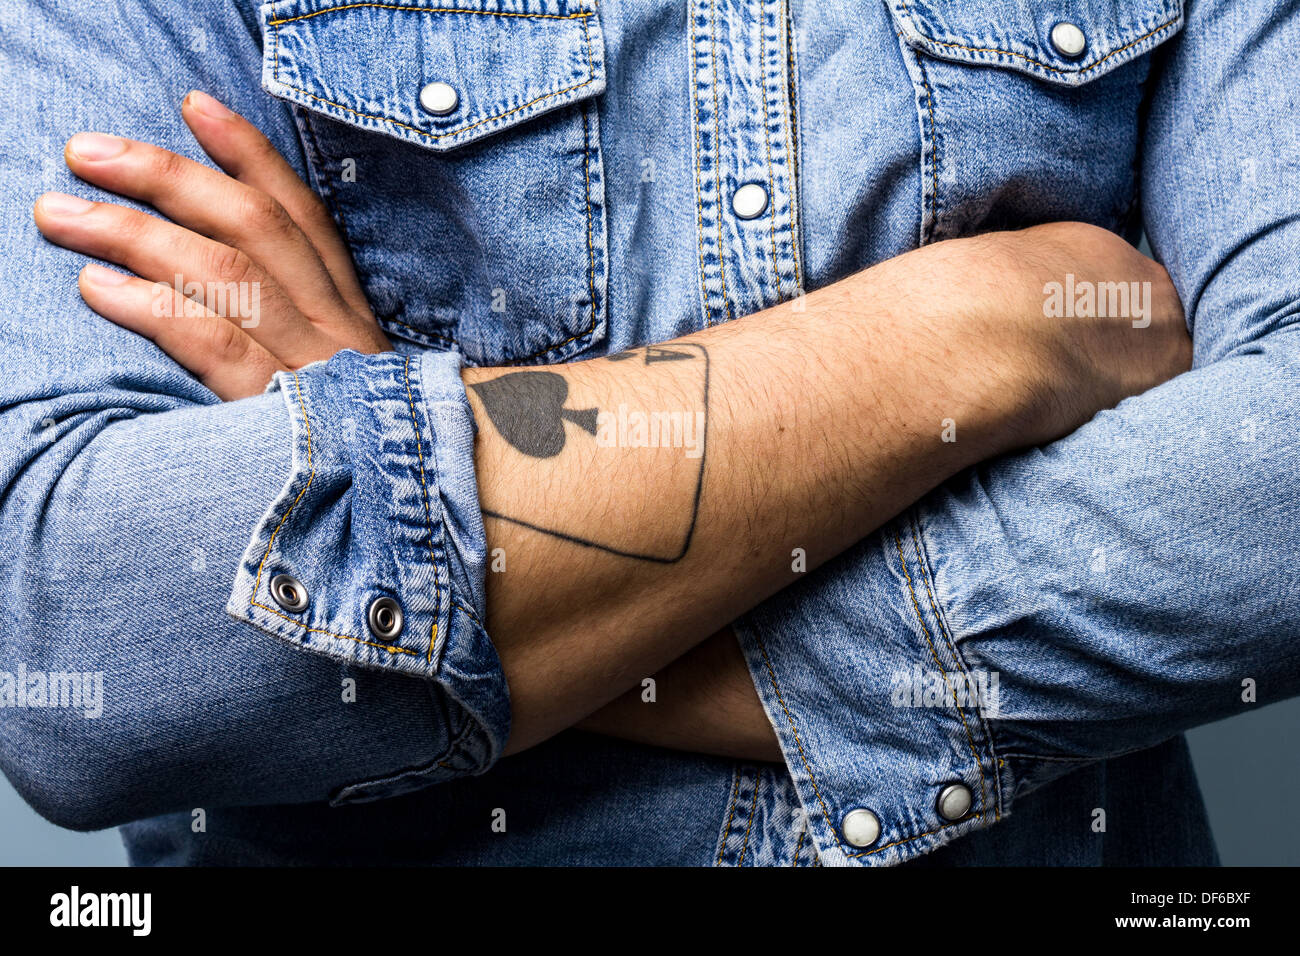 Close up on young man's folded arms with ace of spades tattoo Stock Photo